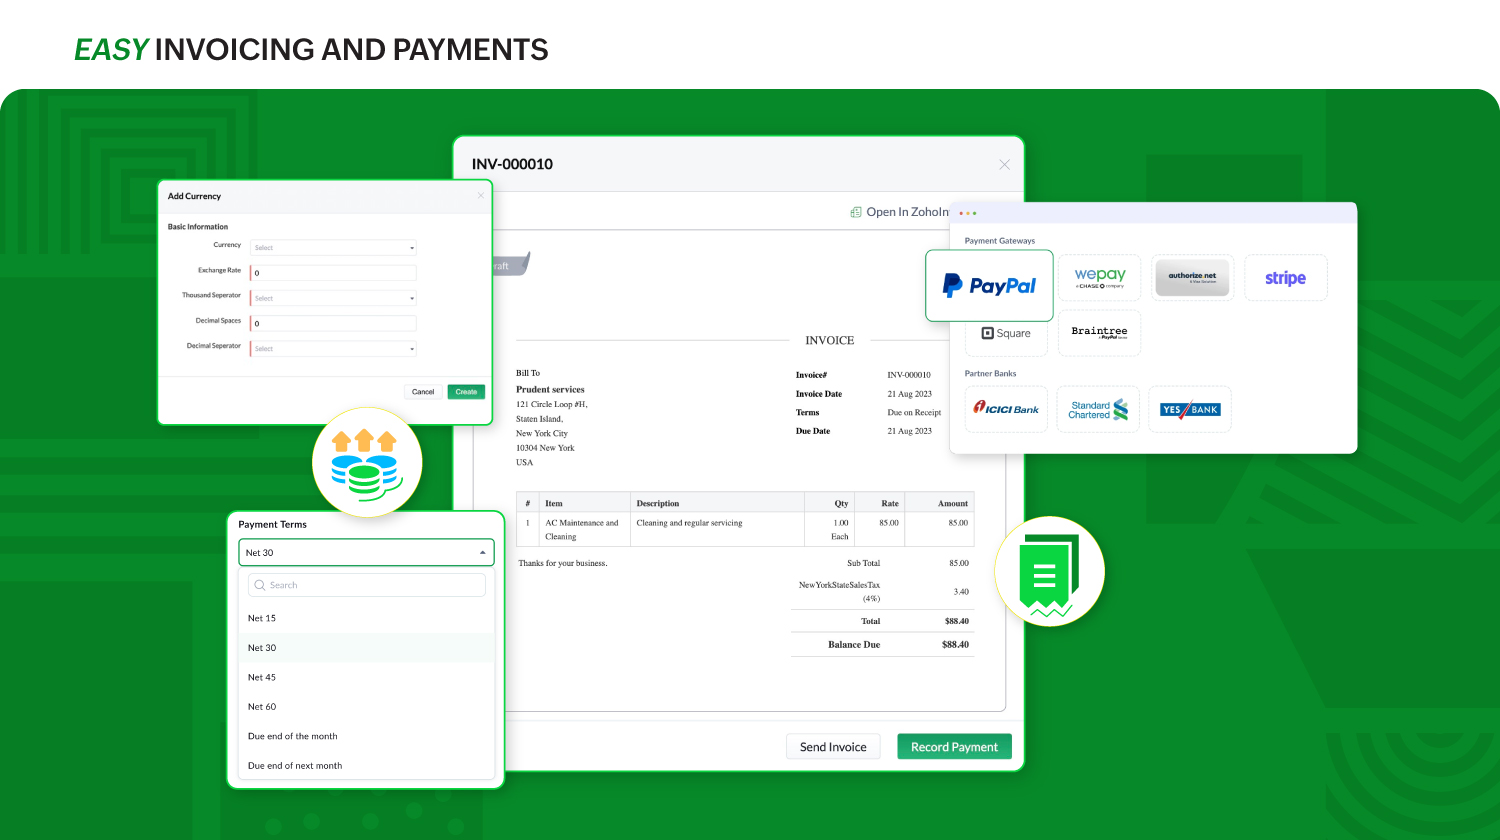 Powered by the Zoho Finance Suite, Zoho FSM makes invoicing easy. Branded invoices can be created and sent with a click. Zoho FSM supports multiple currencies and region specific taxes. It also supports multiple online payment gateways.